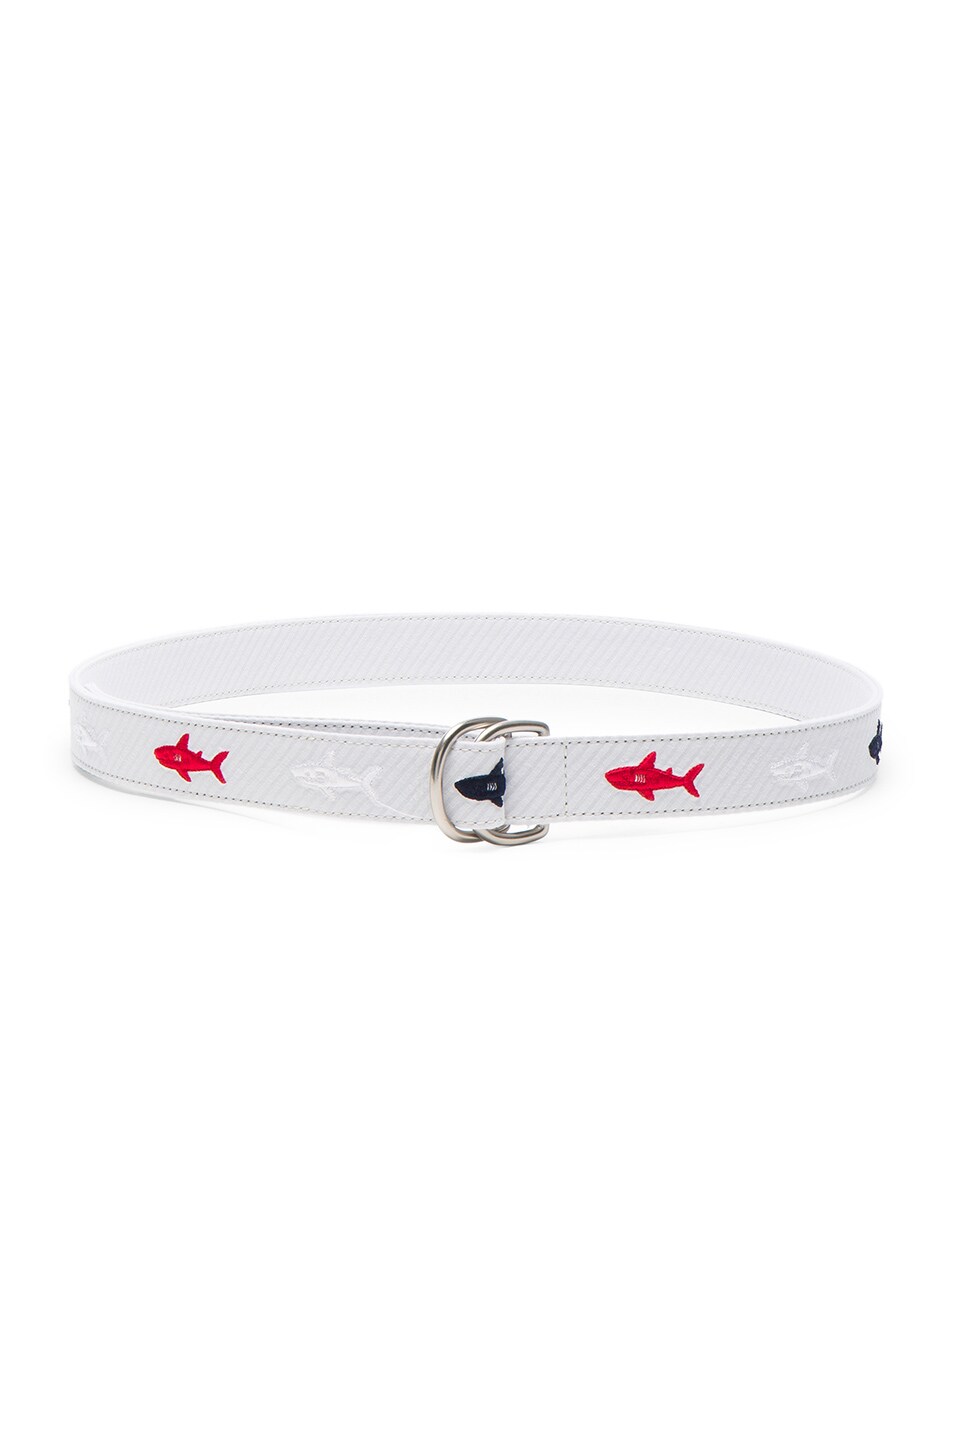 Image 1 of Thom Browne Shark Embroidered Seersucker Belt in Red, White & Blue